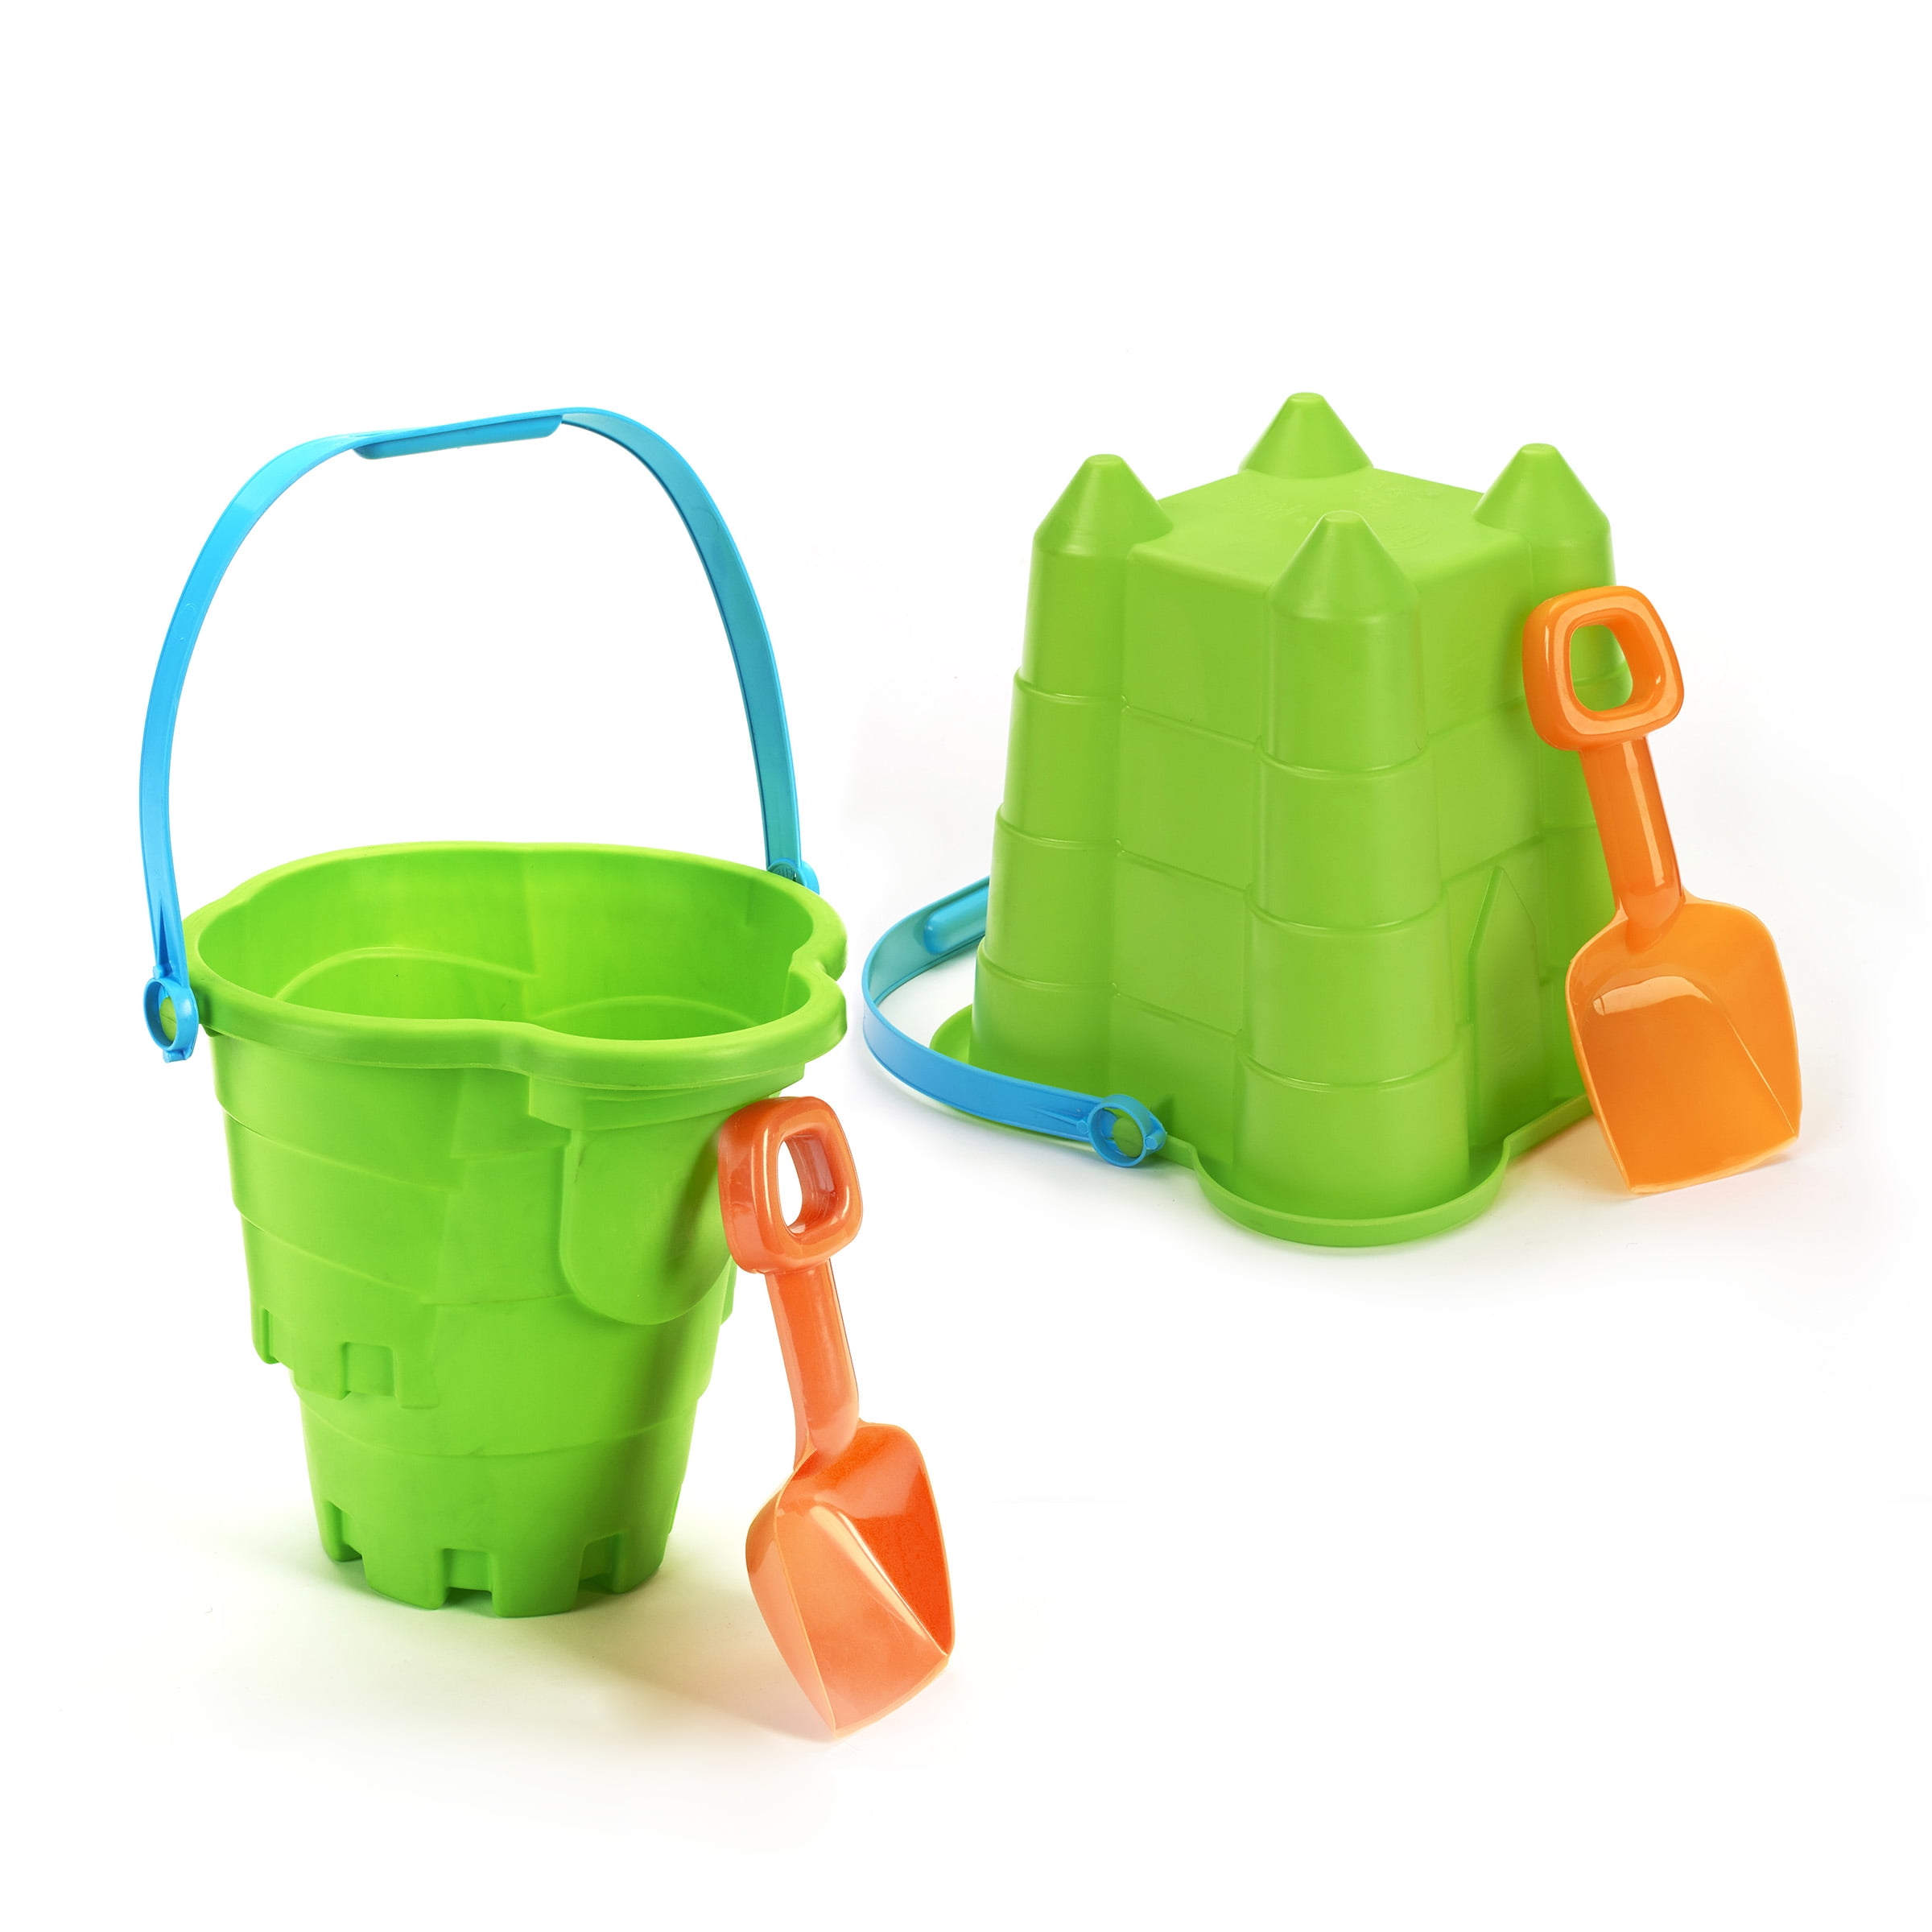 Details about   Sand Bucket 4-piece Set for American Girl Doll Beach Toys Doll Sand Pail Set 